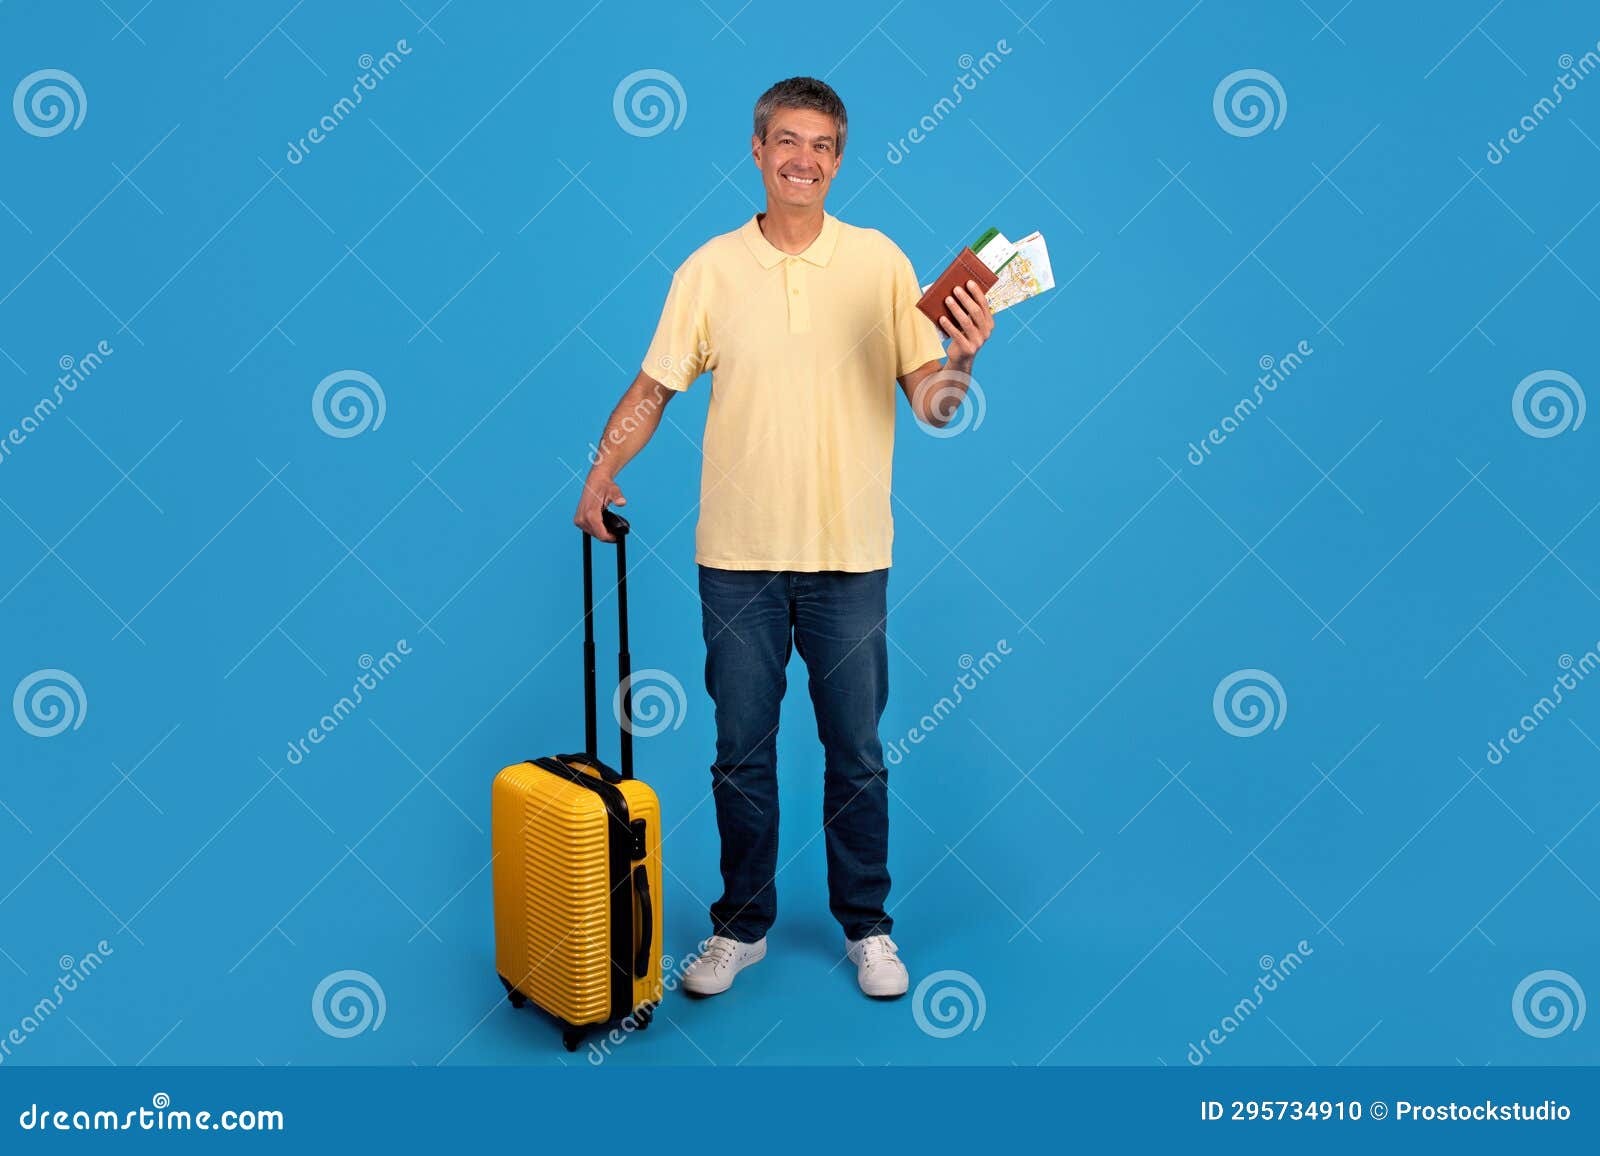 gray globetrotter man with suitcase and tickets on blue background